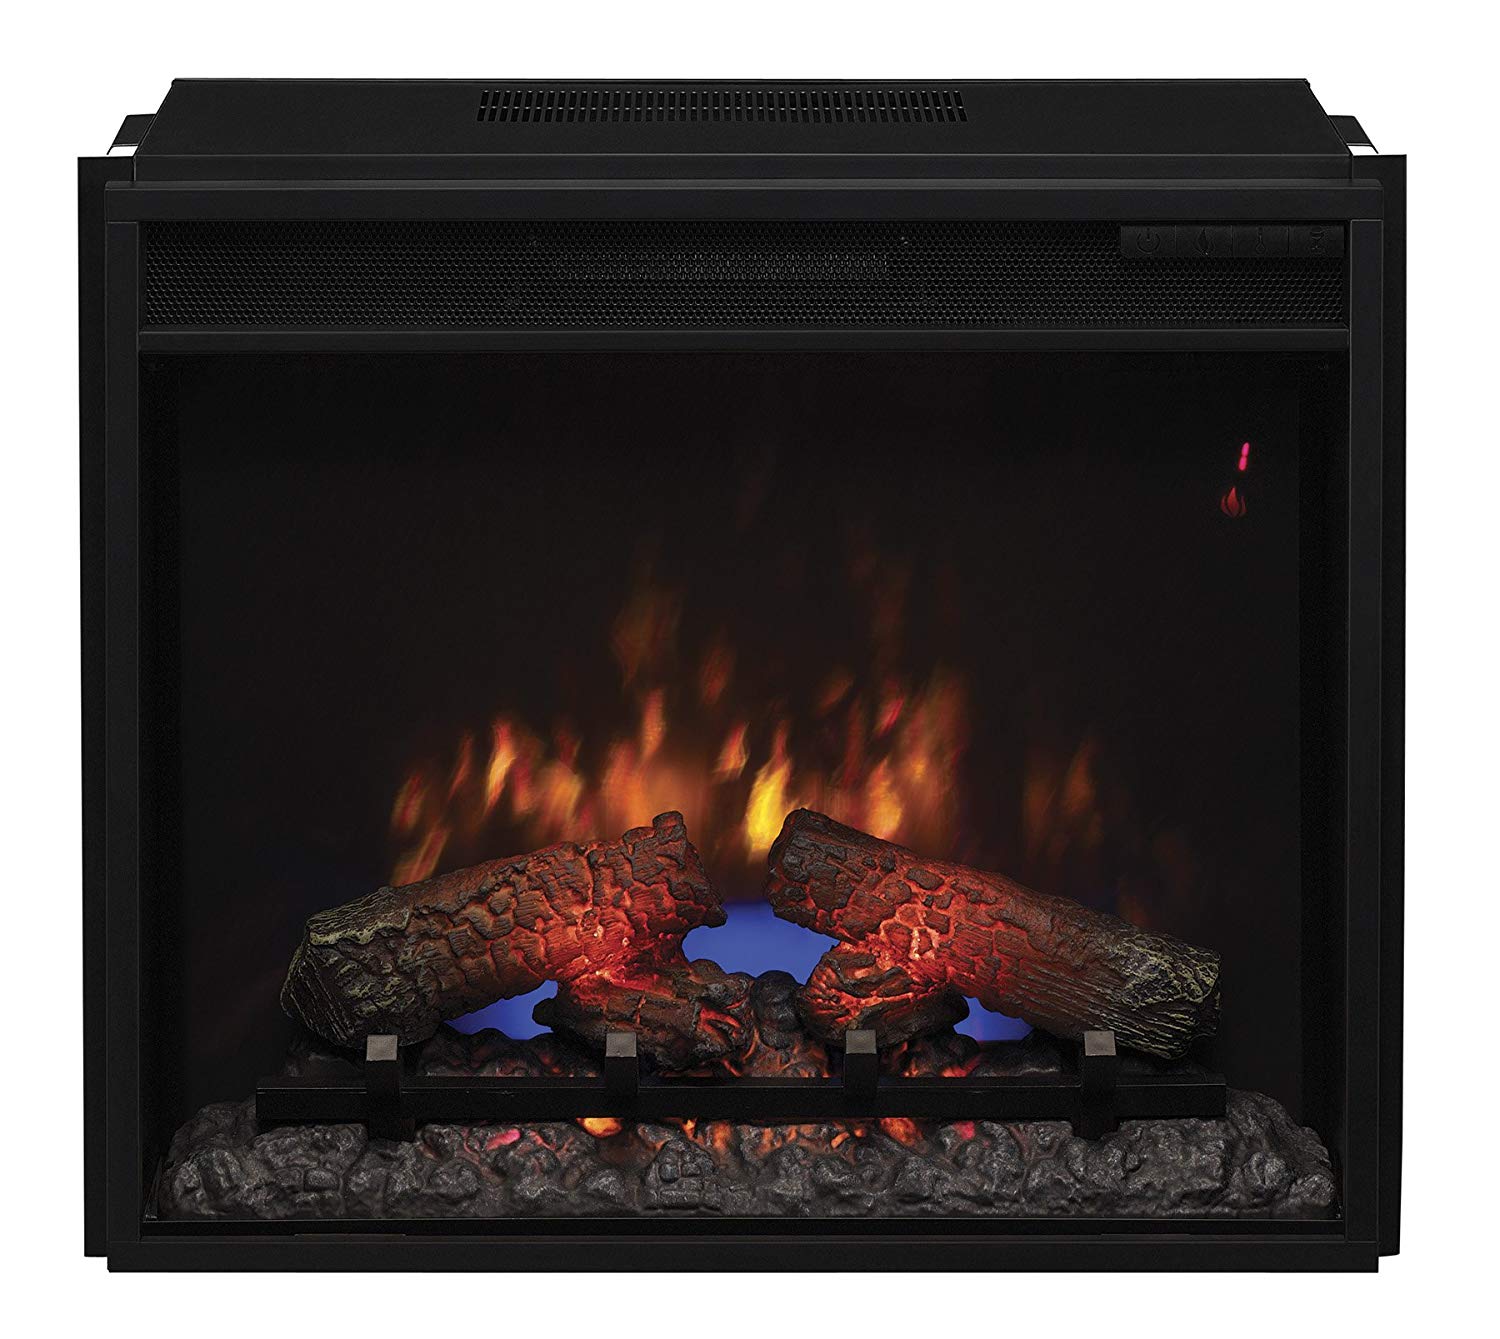 Modern Electric Fireplace with Mantel New Classicflame 23ef031grp 23" Electric Fireplace Insert with Safer Plug